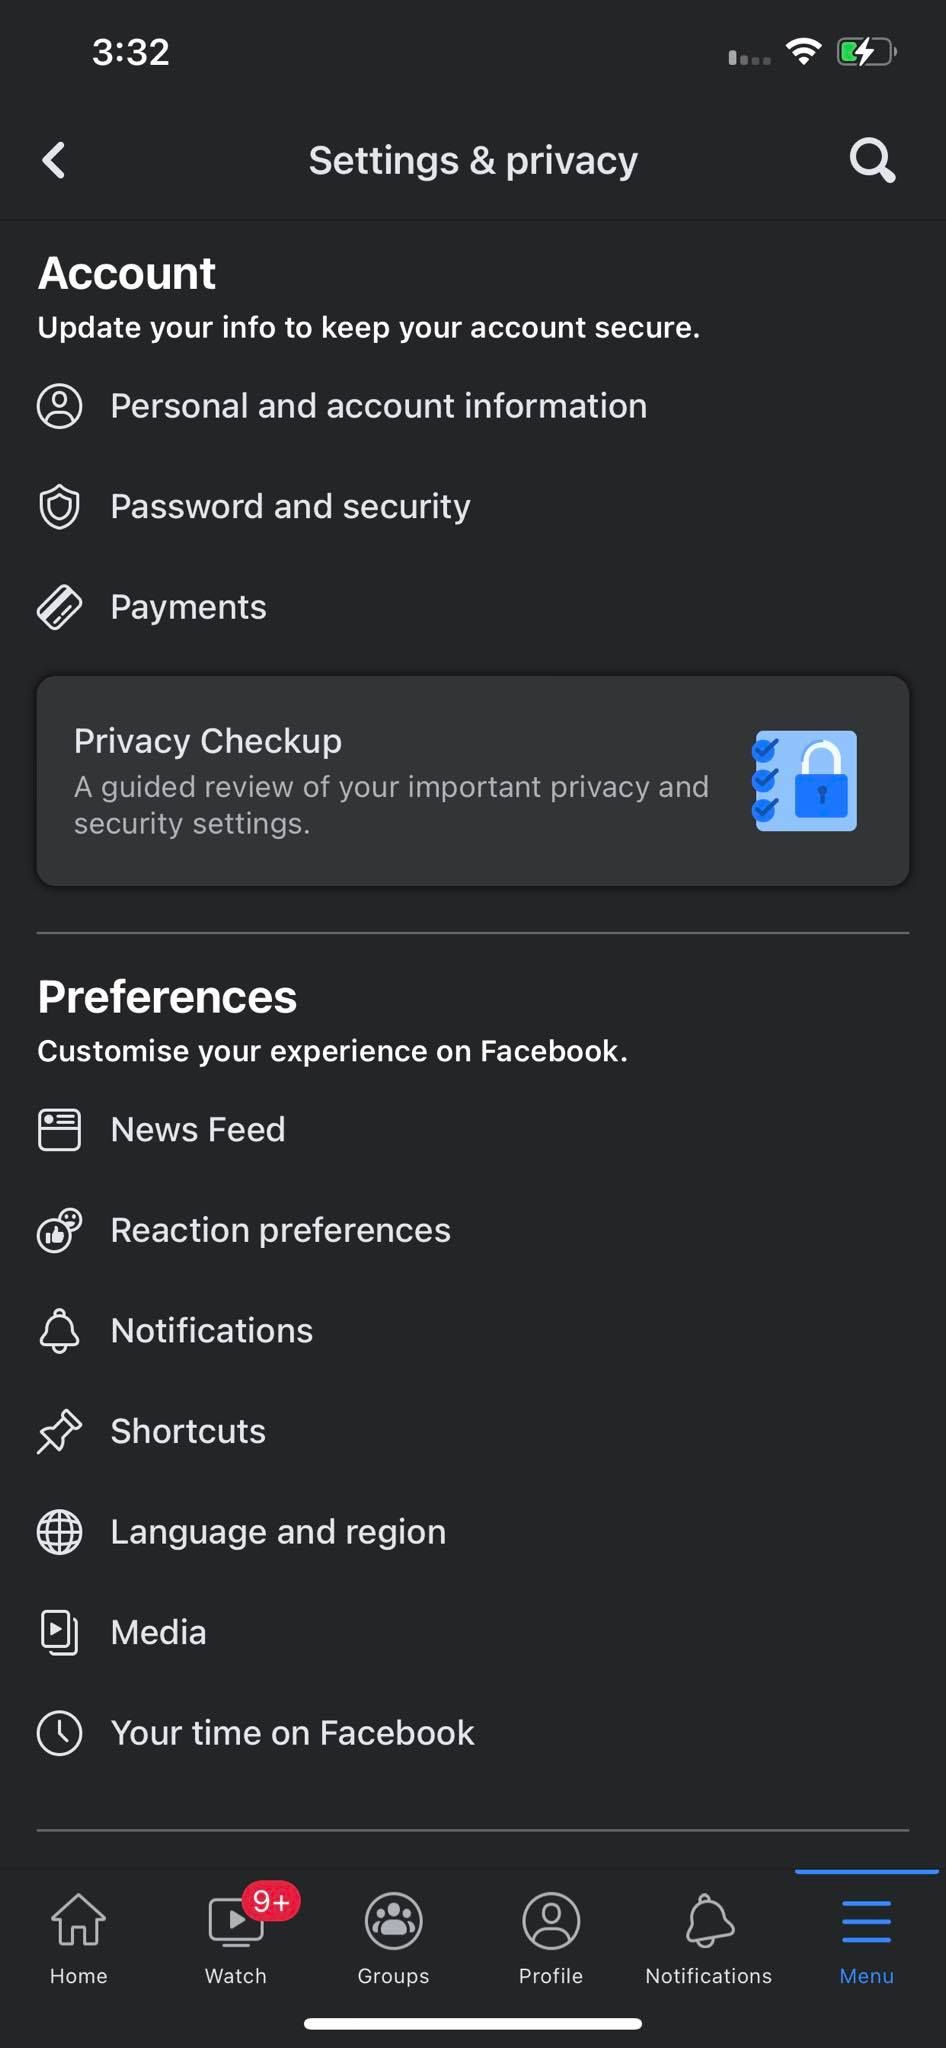 Your Time on Facebook Option in Facebook Settings